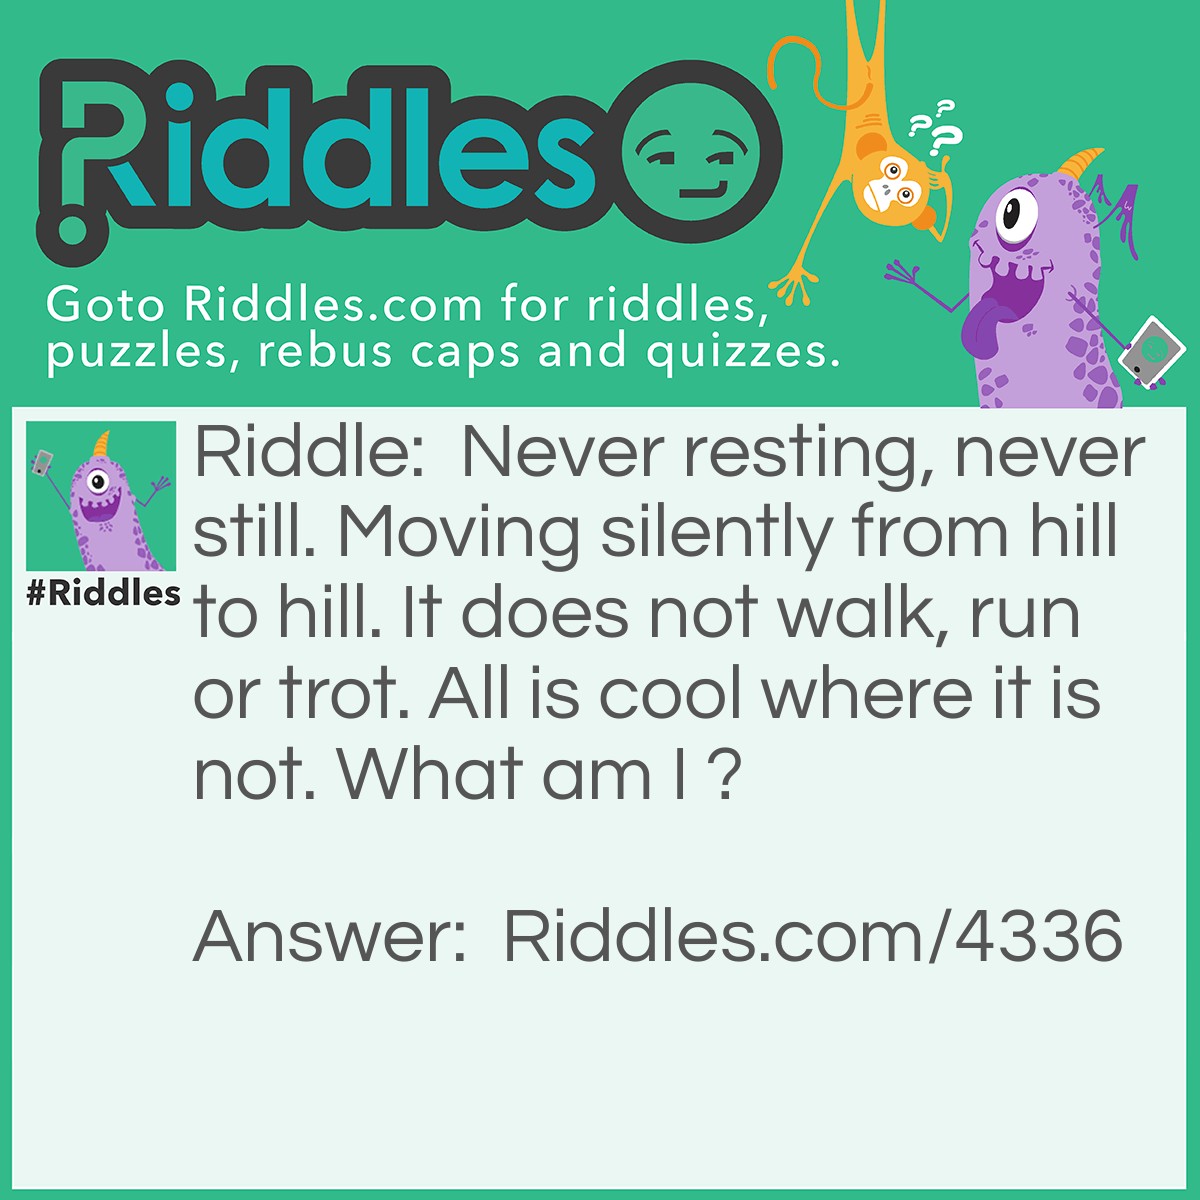 Riddle: Never resting, never still. Moving silently from hill to hill. It does not walk, run or trot. All is cool where it is not. What am I ? Answer: Sunshine.